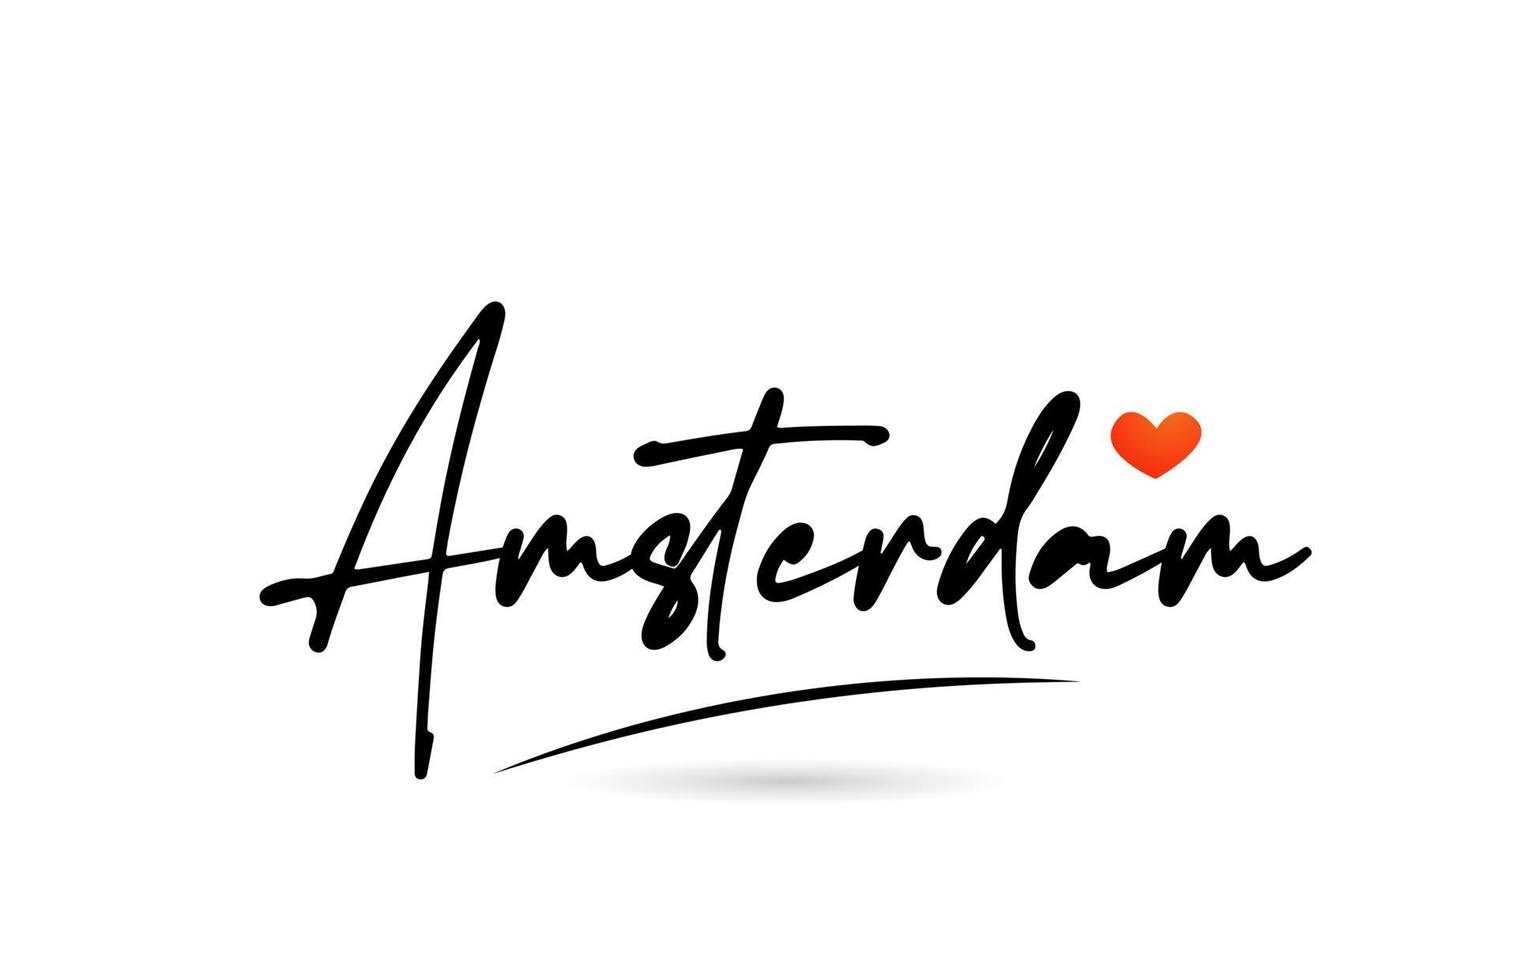 Amsterdam city text with red love heart design.  Typography handwritten design icon vector